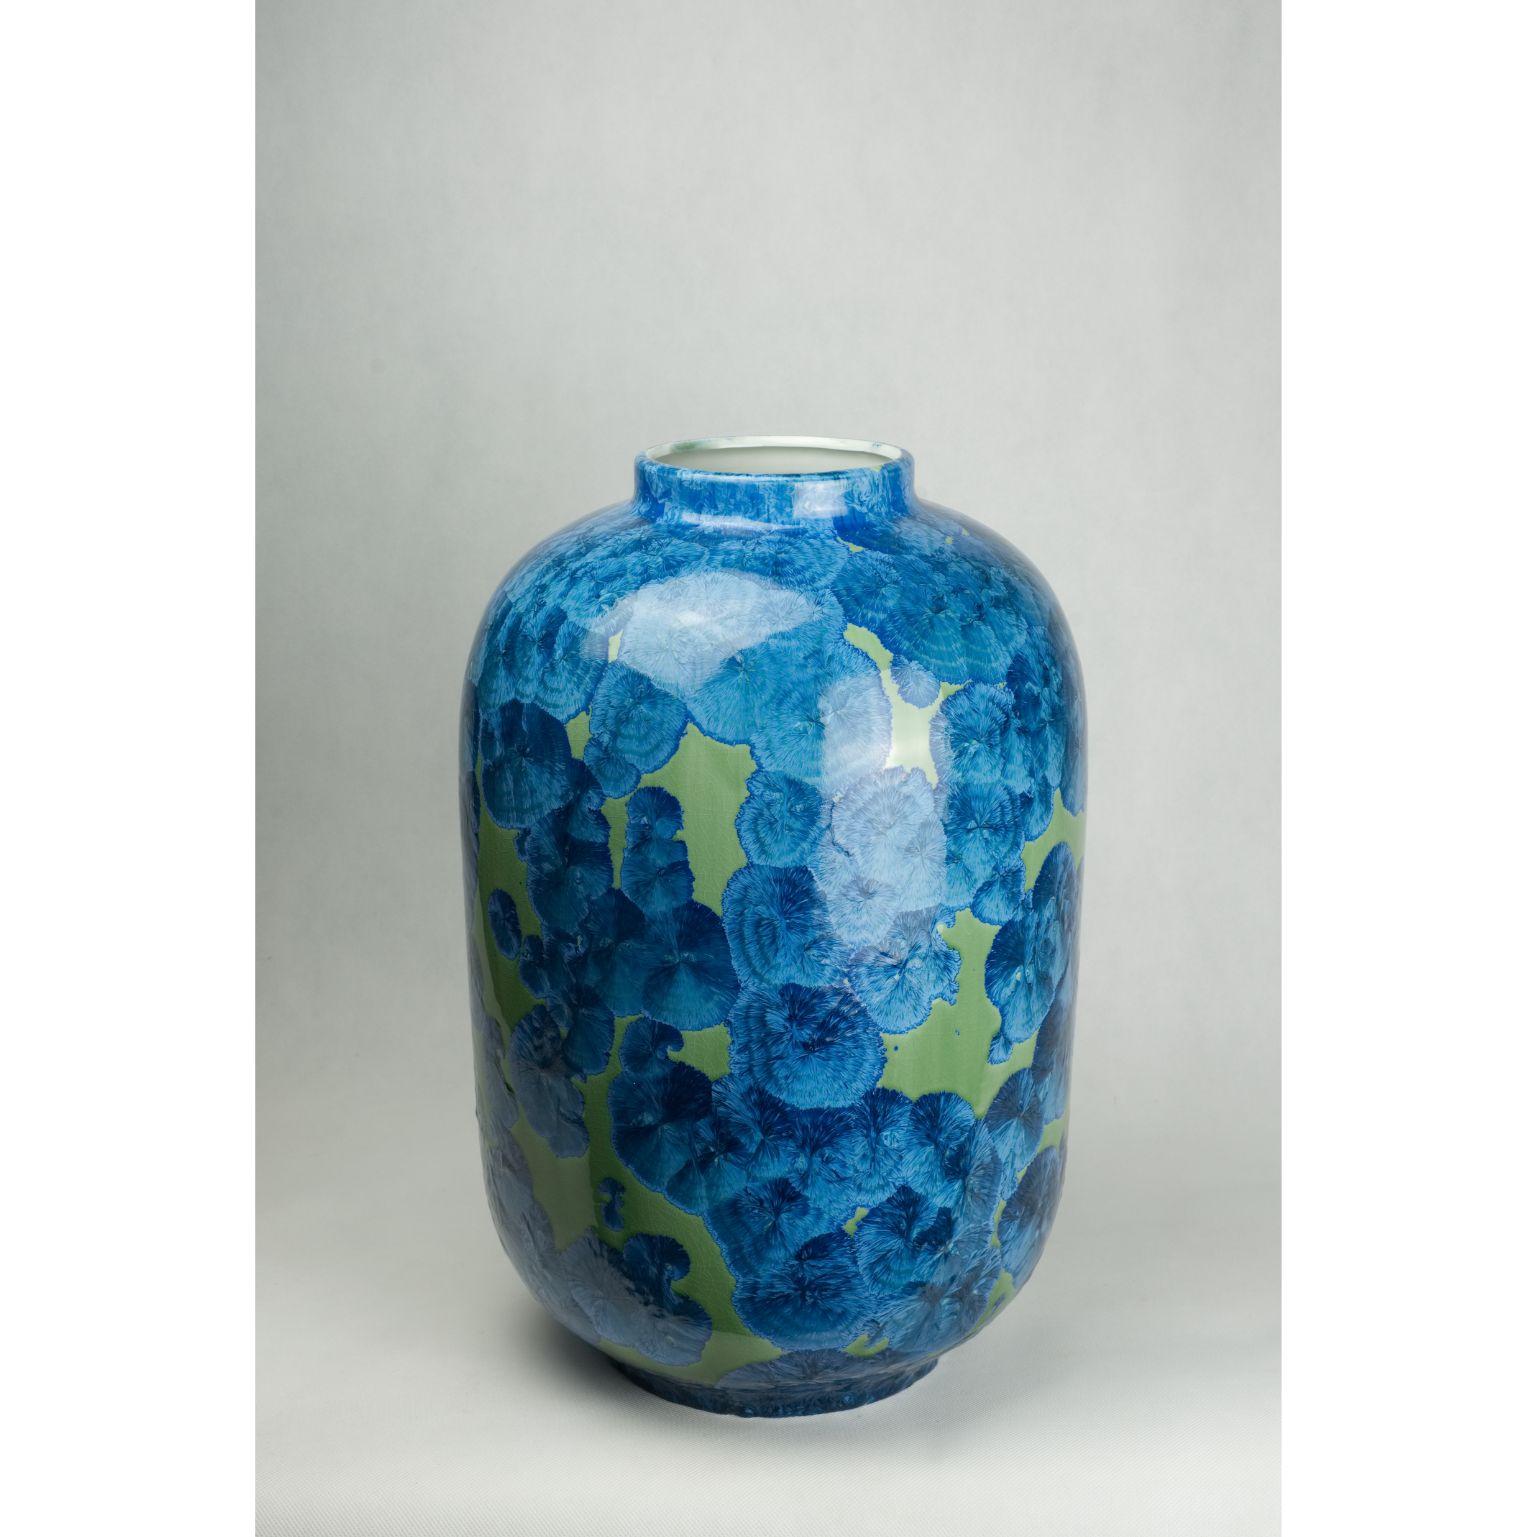 Volume 5 vase by Milan Pekar
Dimensions: D 32 x H 48 cm
Materials: Glaze, Porcelain

Hand-made in the Czech Republic. 

Also available: different colors and patterns

Established own studio August 2009 – Focus mainly on porcelain, developing